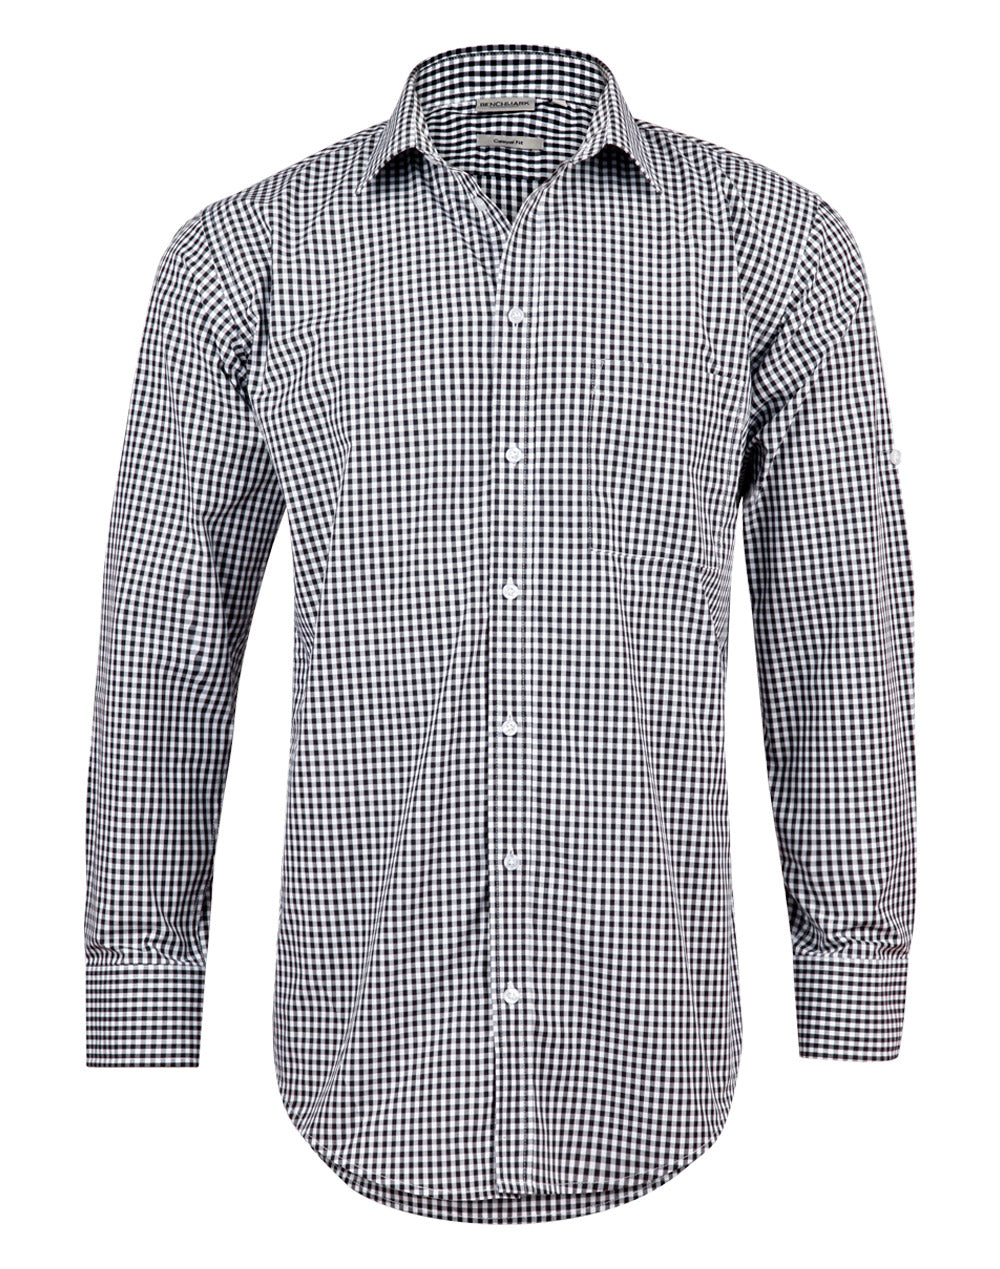 JCM7300L Men’s Gingham Check Long Sleeve Shirt with Roll-up Tab Sleeve